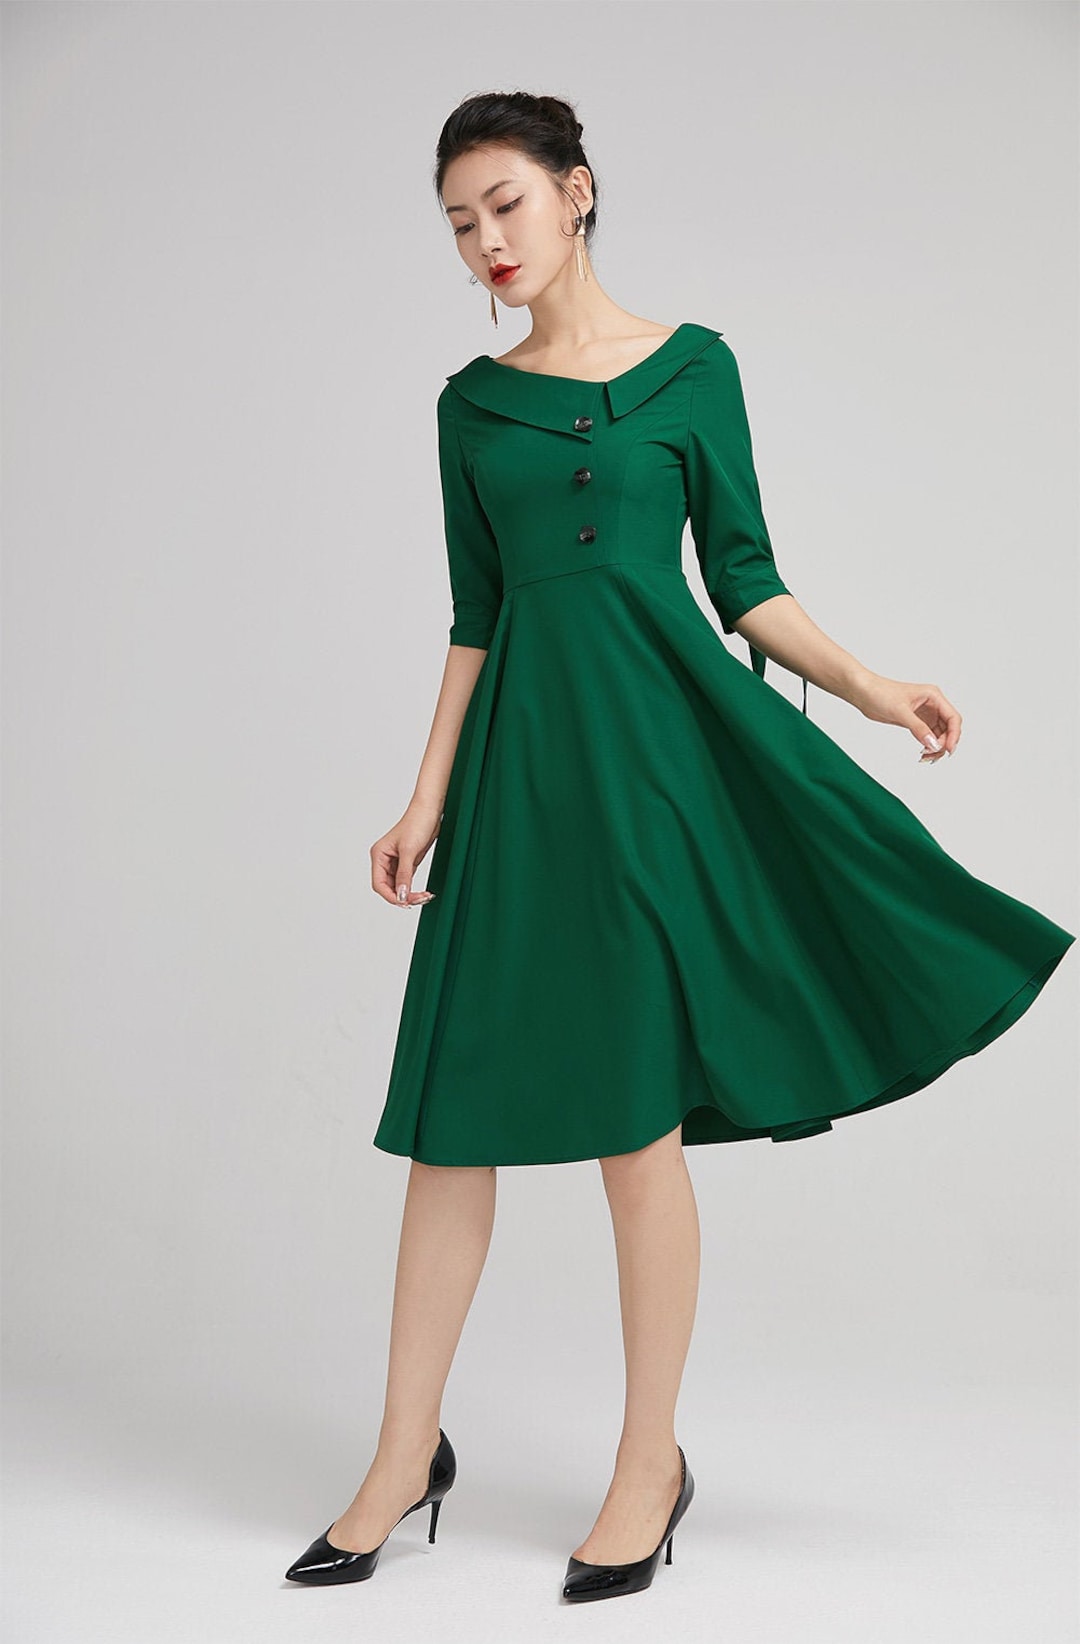 Green Lyddie Wiggle Dress - a Vintage style pencil dress